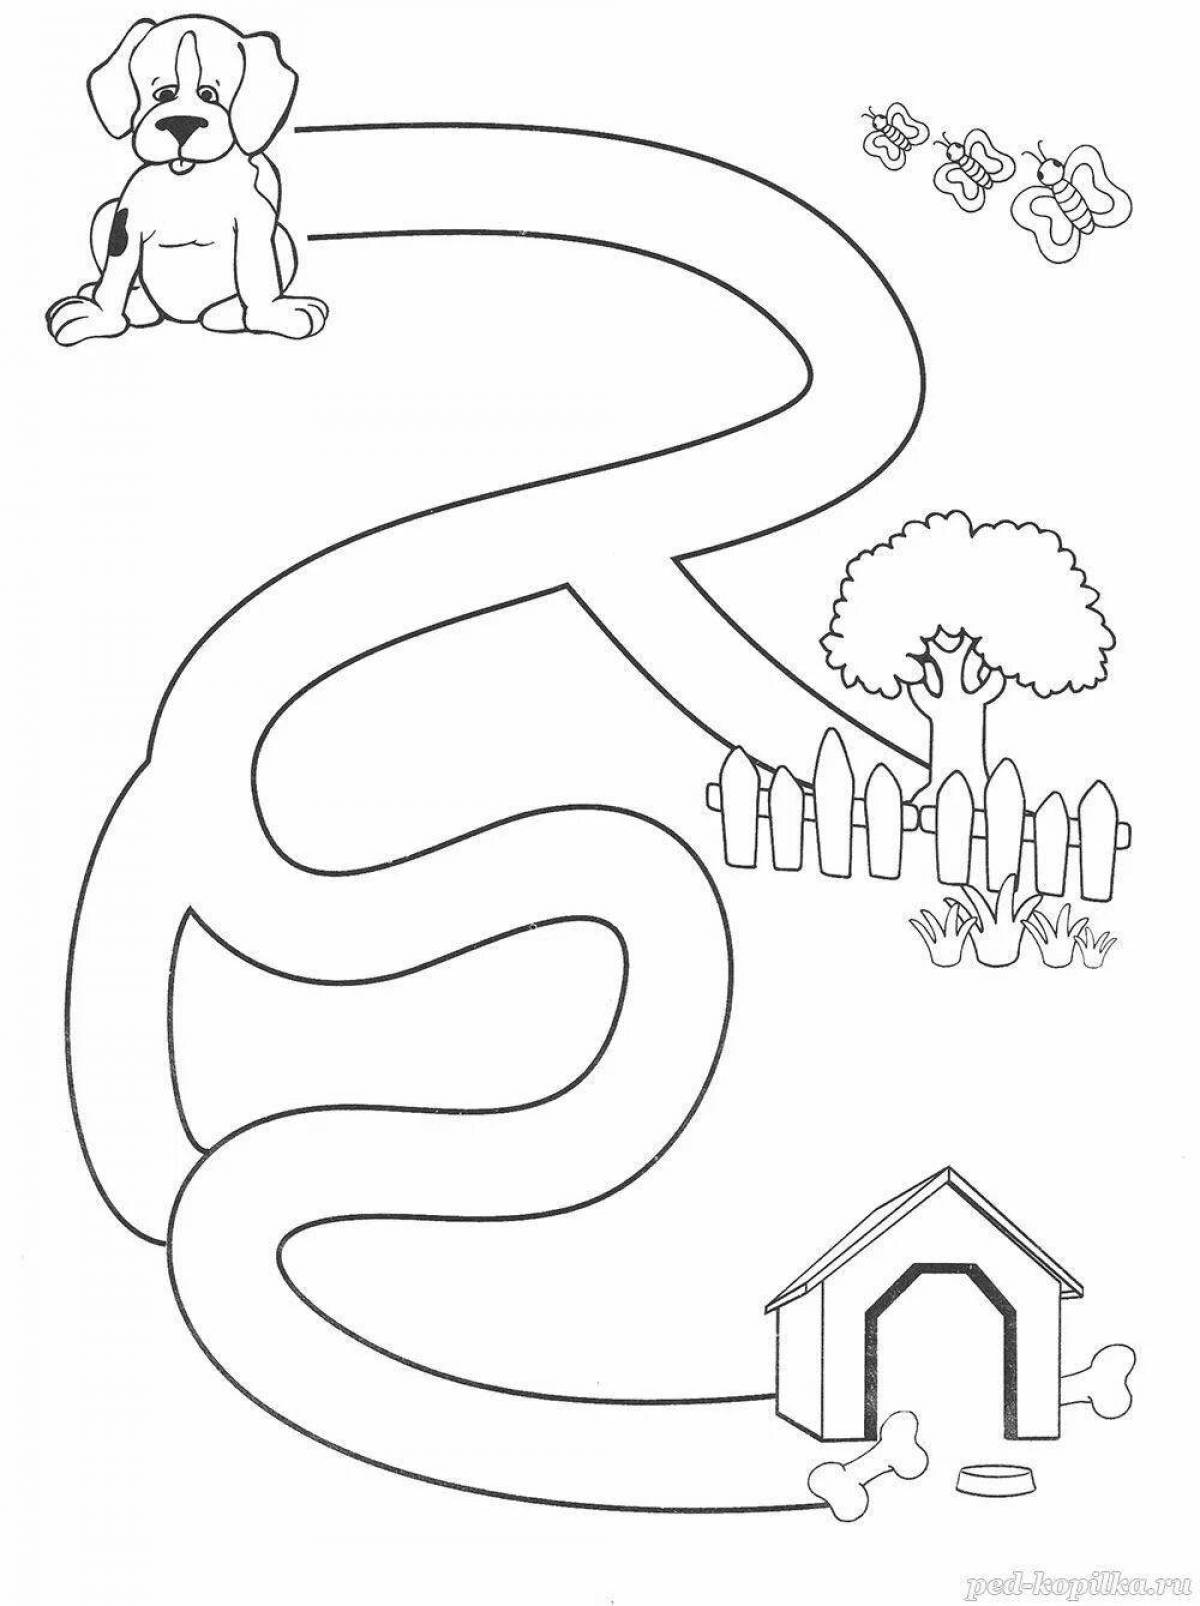 Charming maze coloring book for kids 3-4 years old